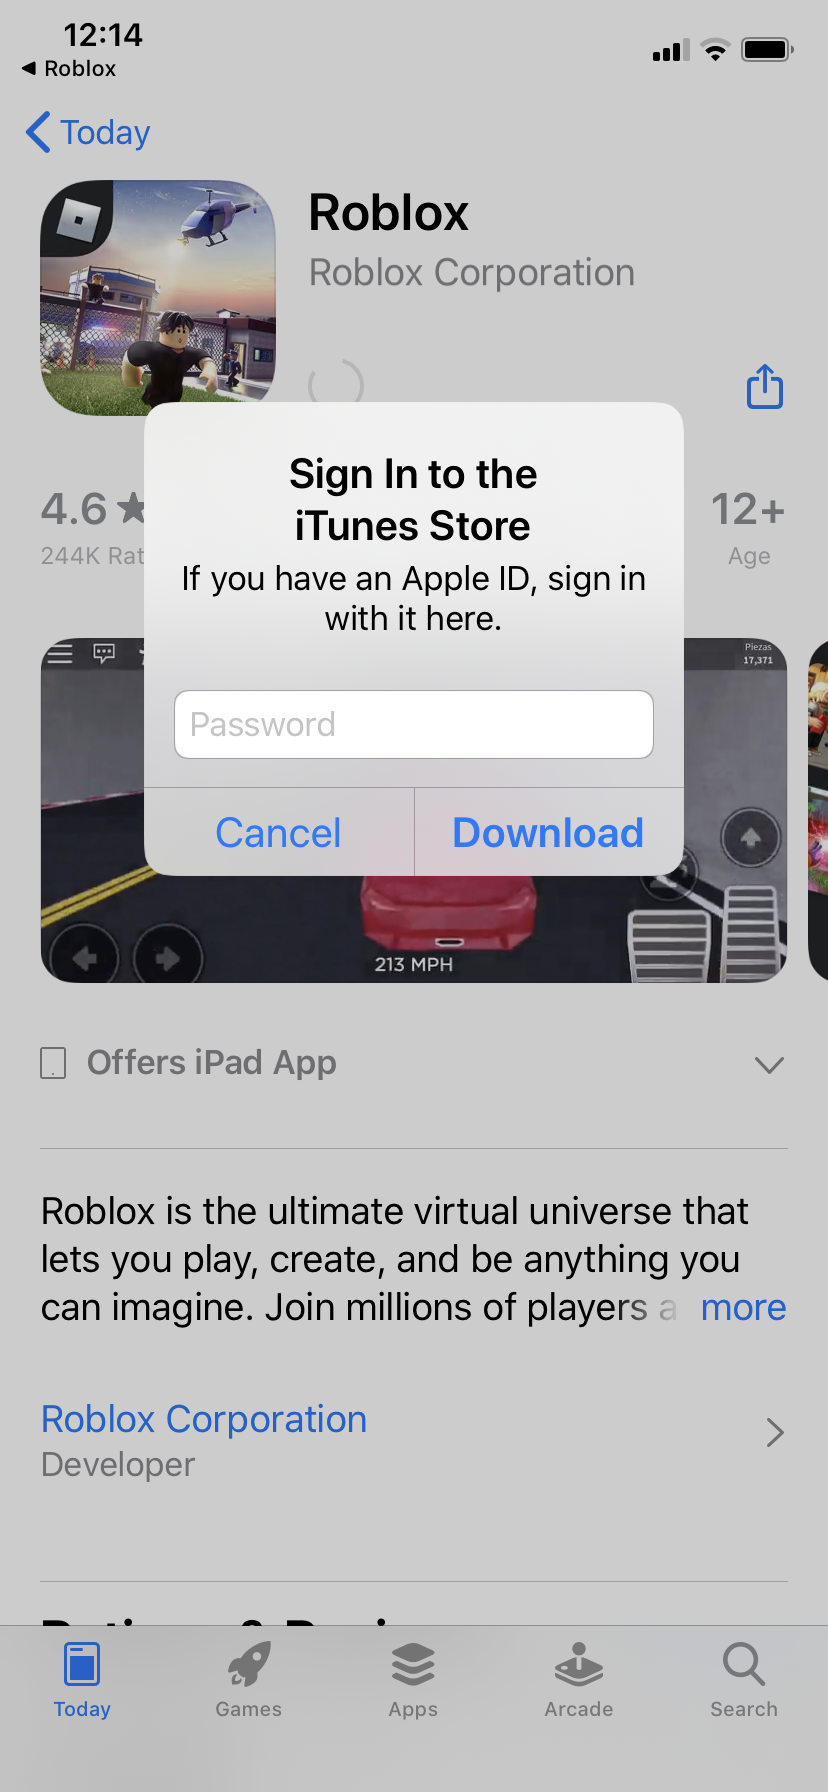 Update If An App Apple Id Apple Community - how to download roblox on ipad without apple id